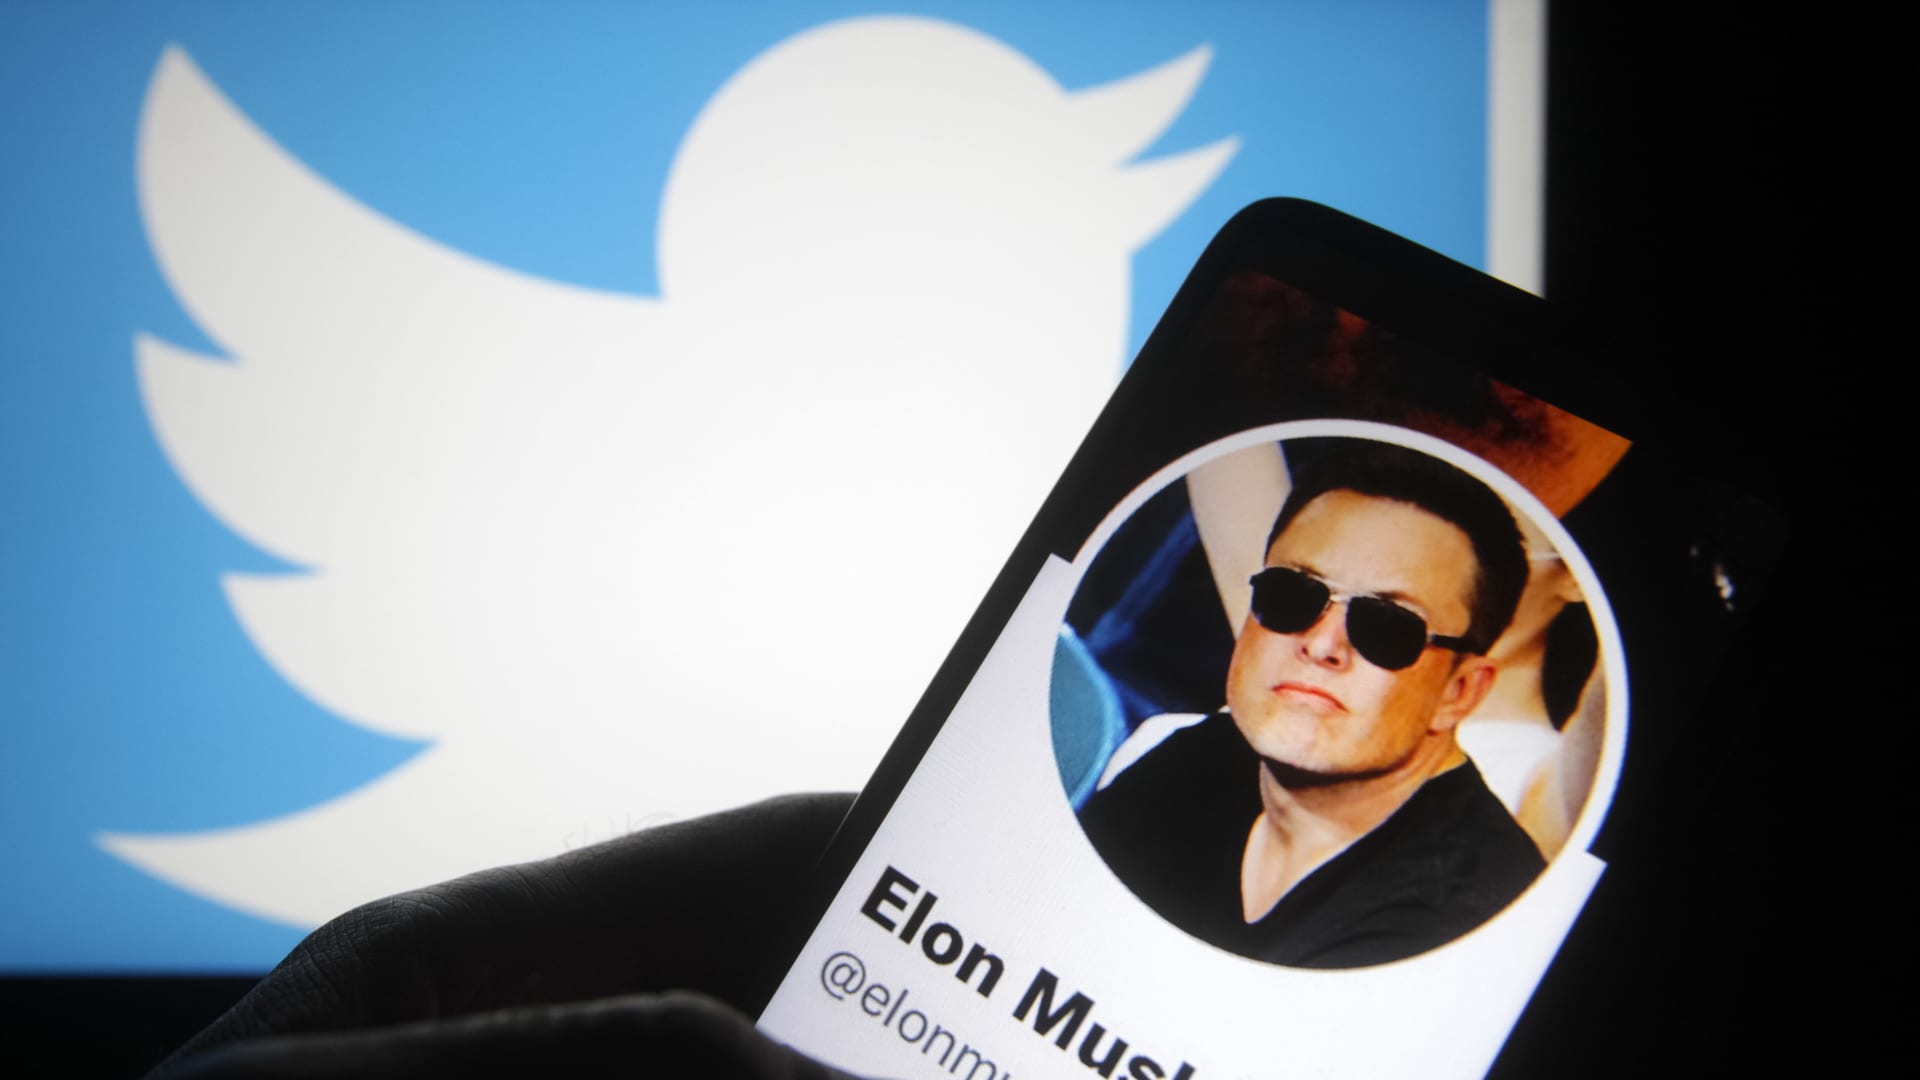 Musk’s Twitter deal faces backlash from advocacy groups that are seeking to block it